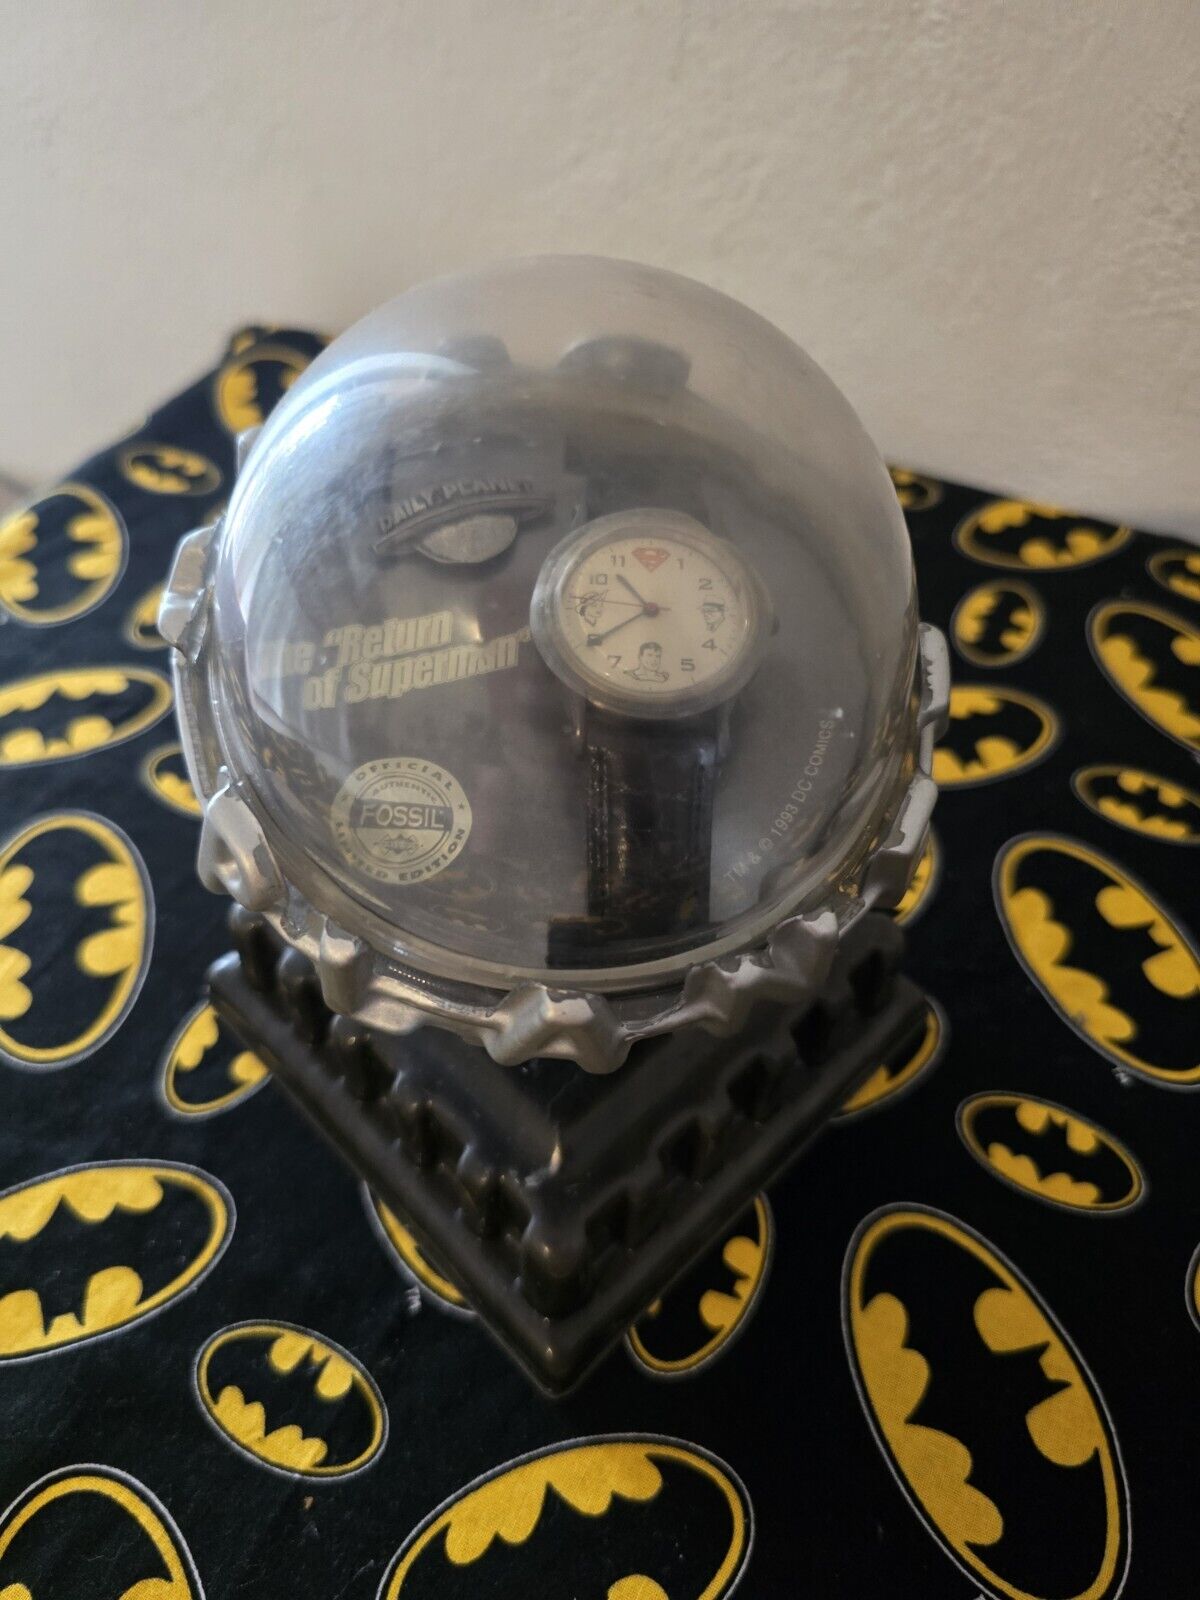 Daily Planet Superman Fossil Watch